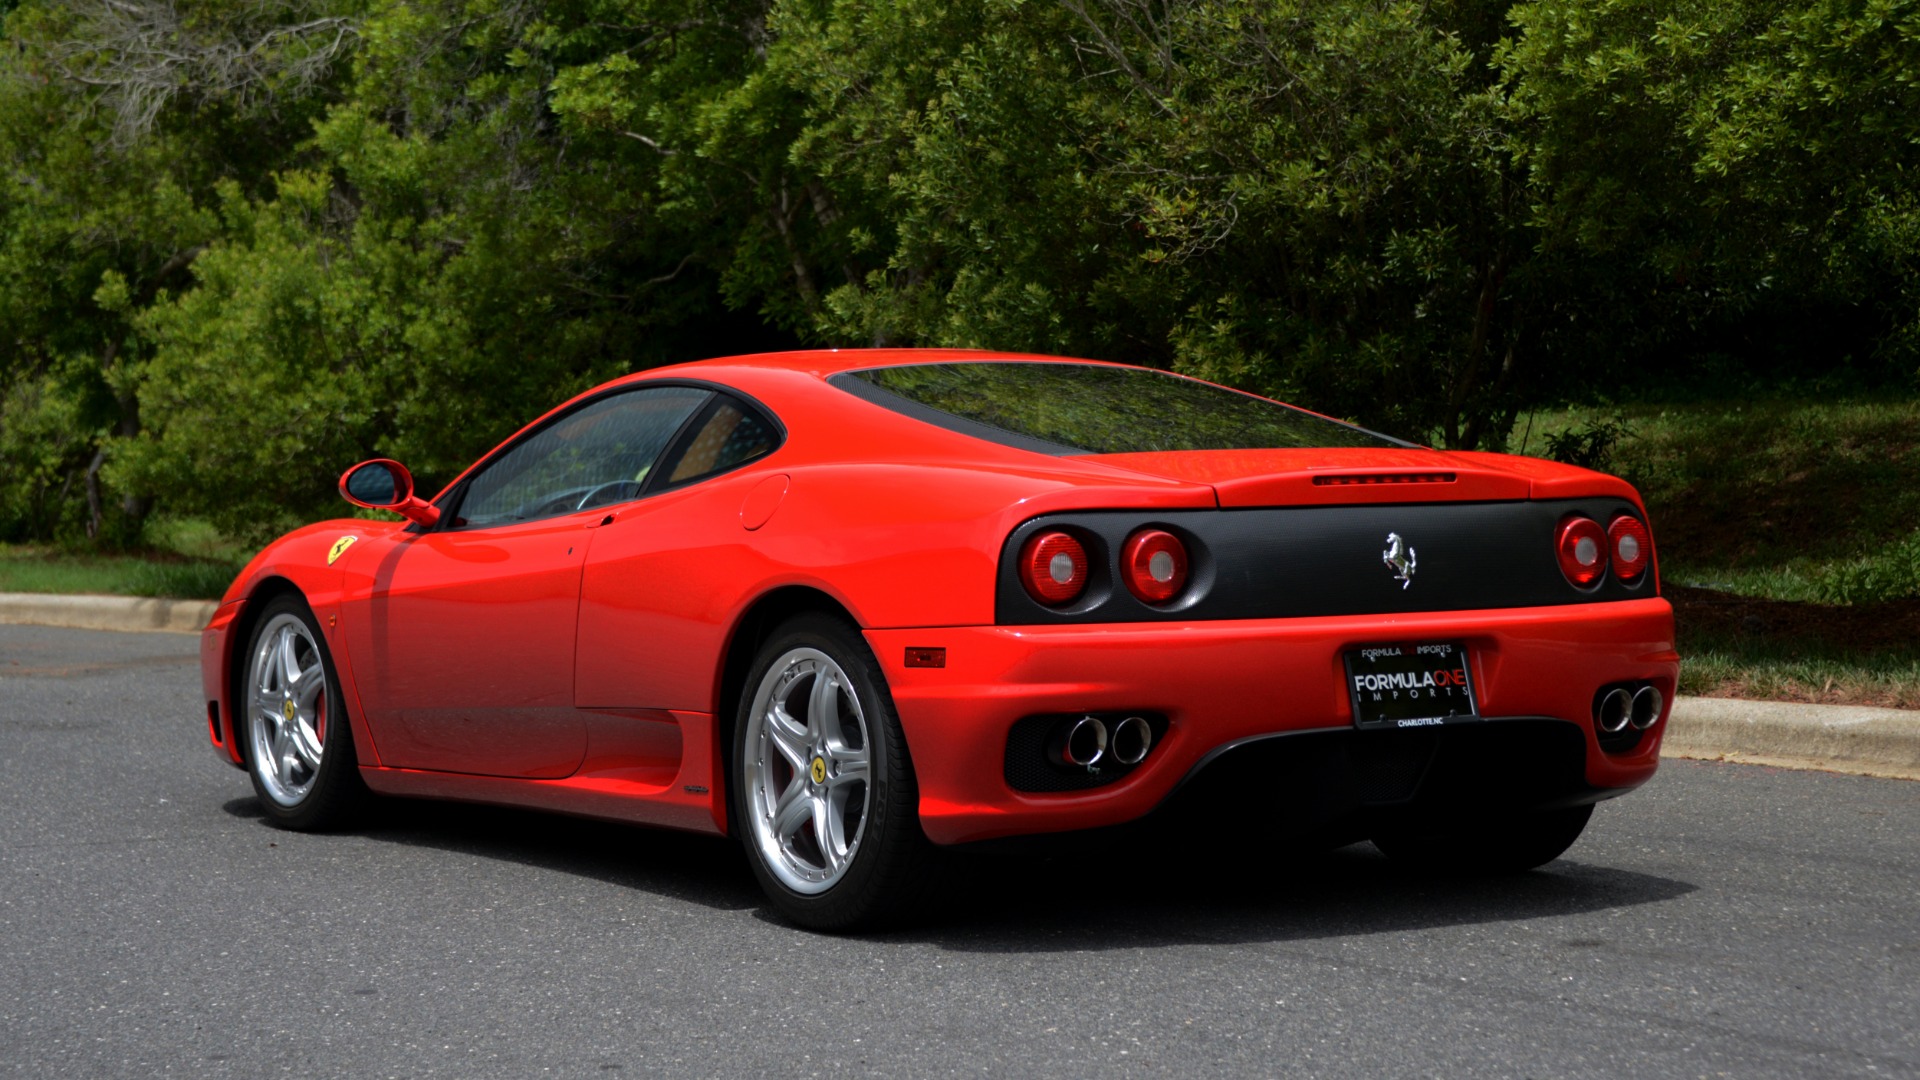 Used 2004 Ferrari 360 MODENA COUPE / GATED 6-SPD MANUAL / SUNROOF / LOW MILES for sale Sold at Formula Imports in Charlotte NC 28227 3